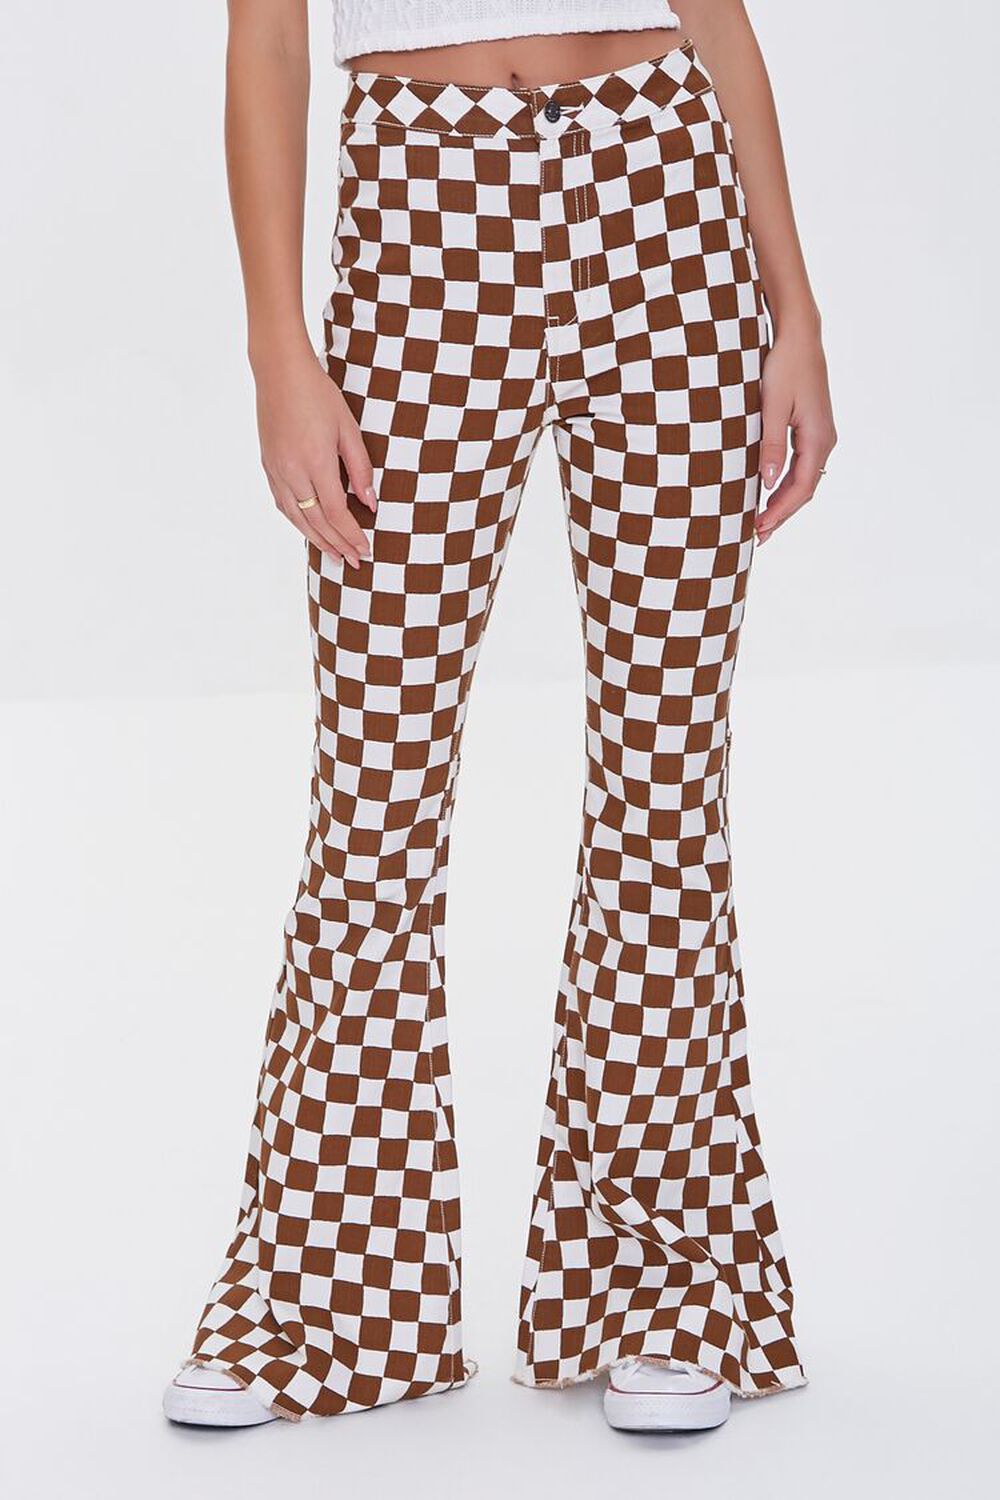 CREAM/BROWN Checkered Flare Jeans, image 2